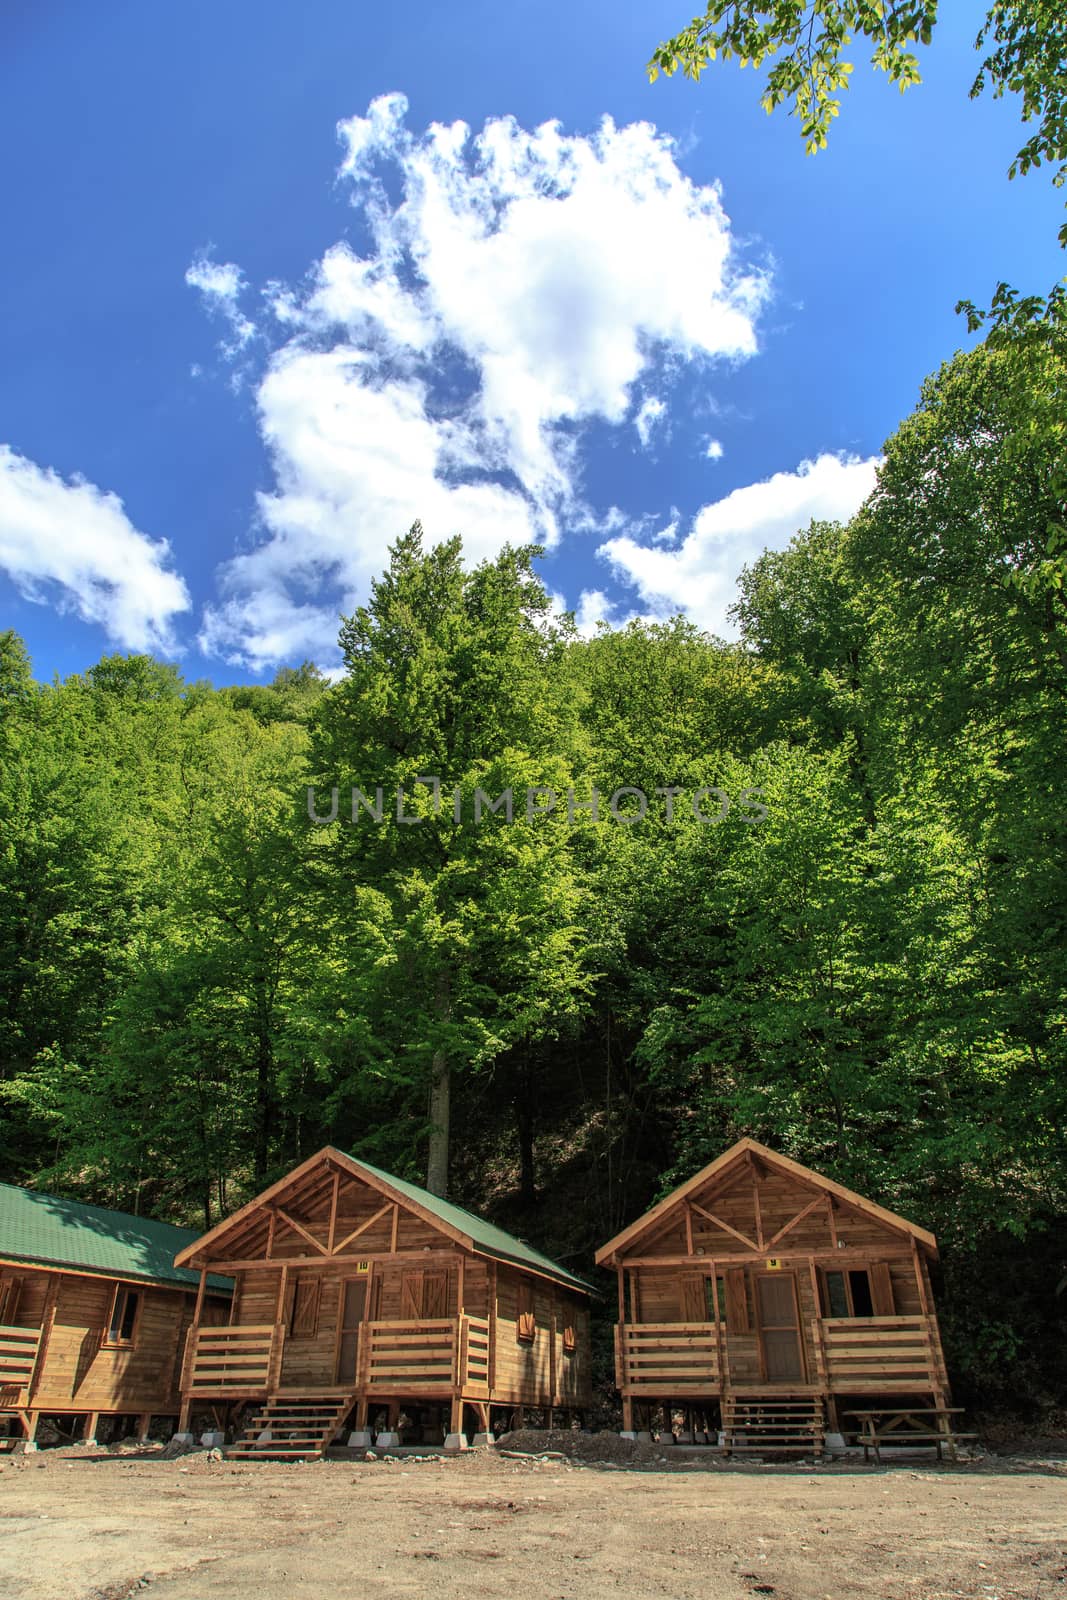 Side view of small wooden bungalows among trees in forest, on blue sky background.